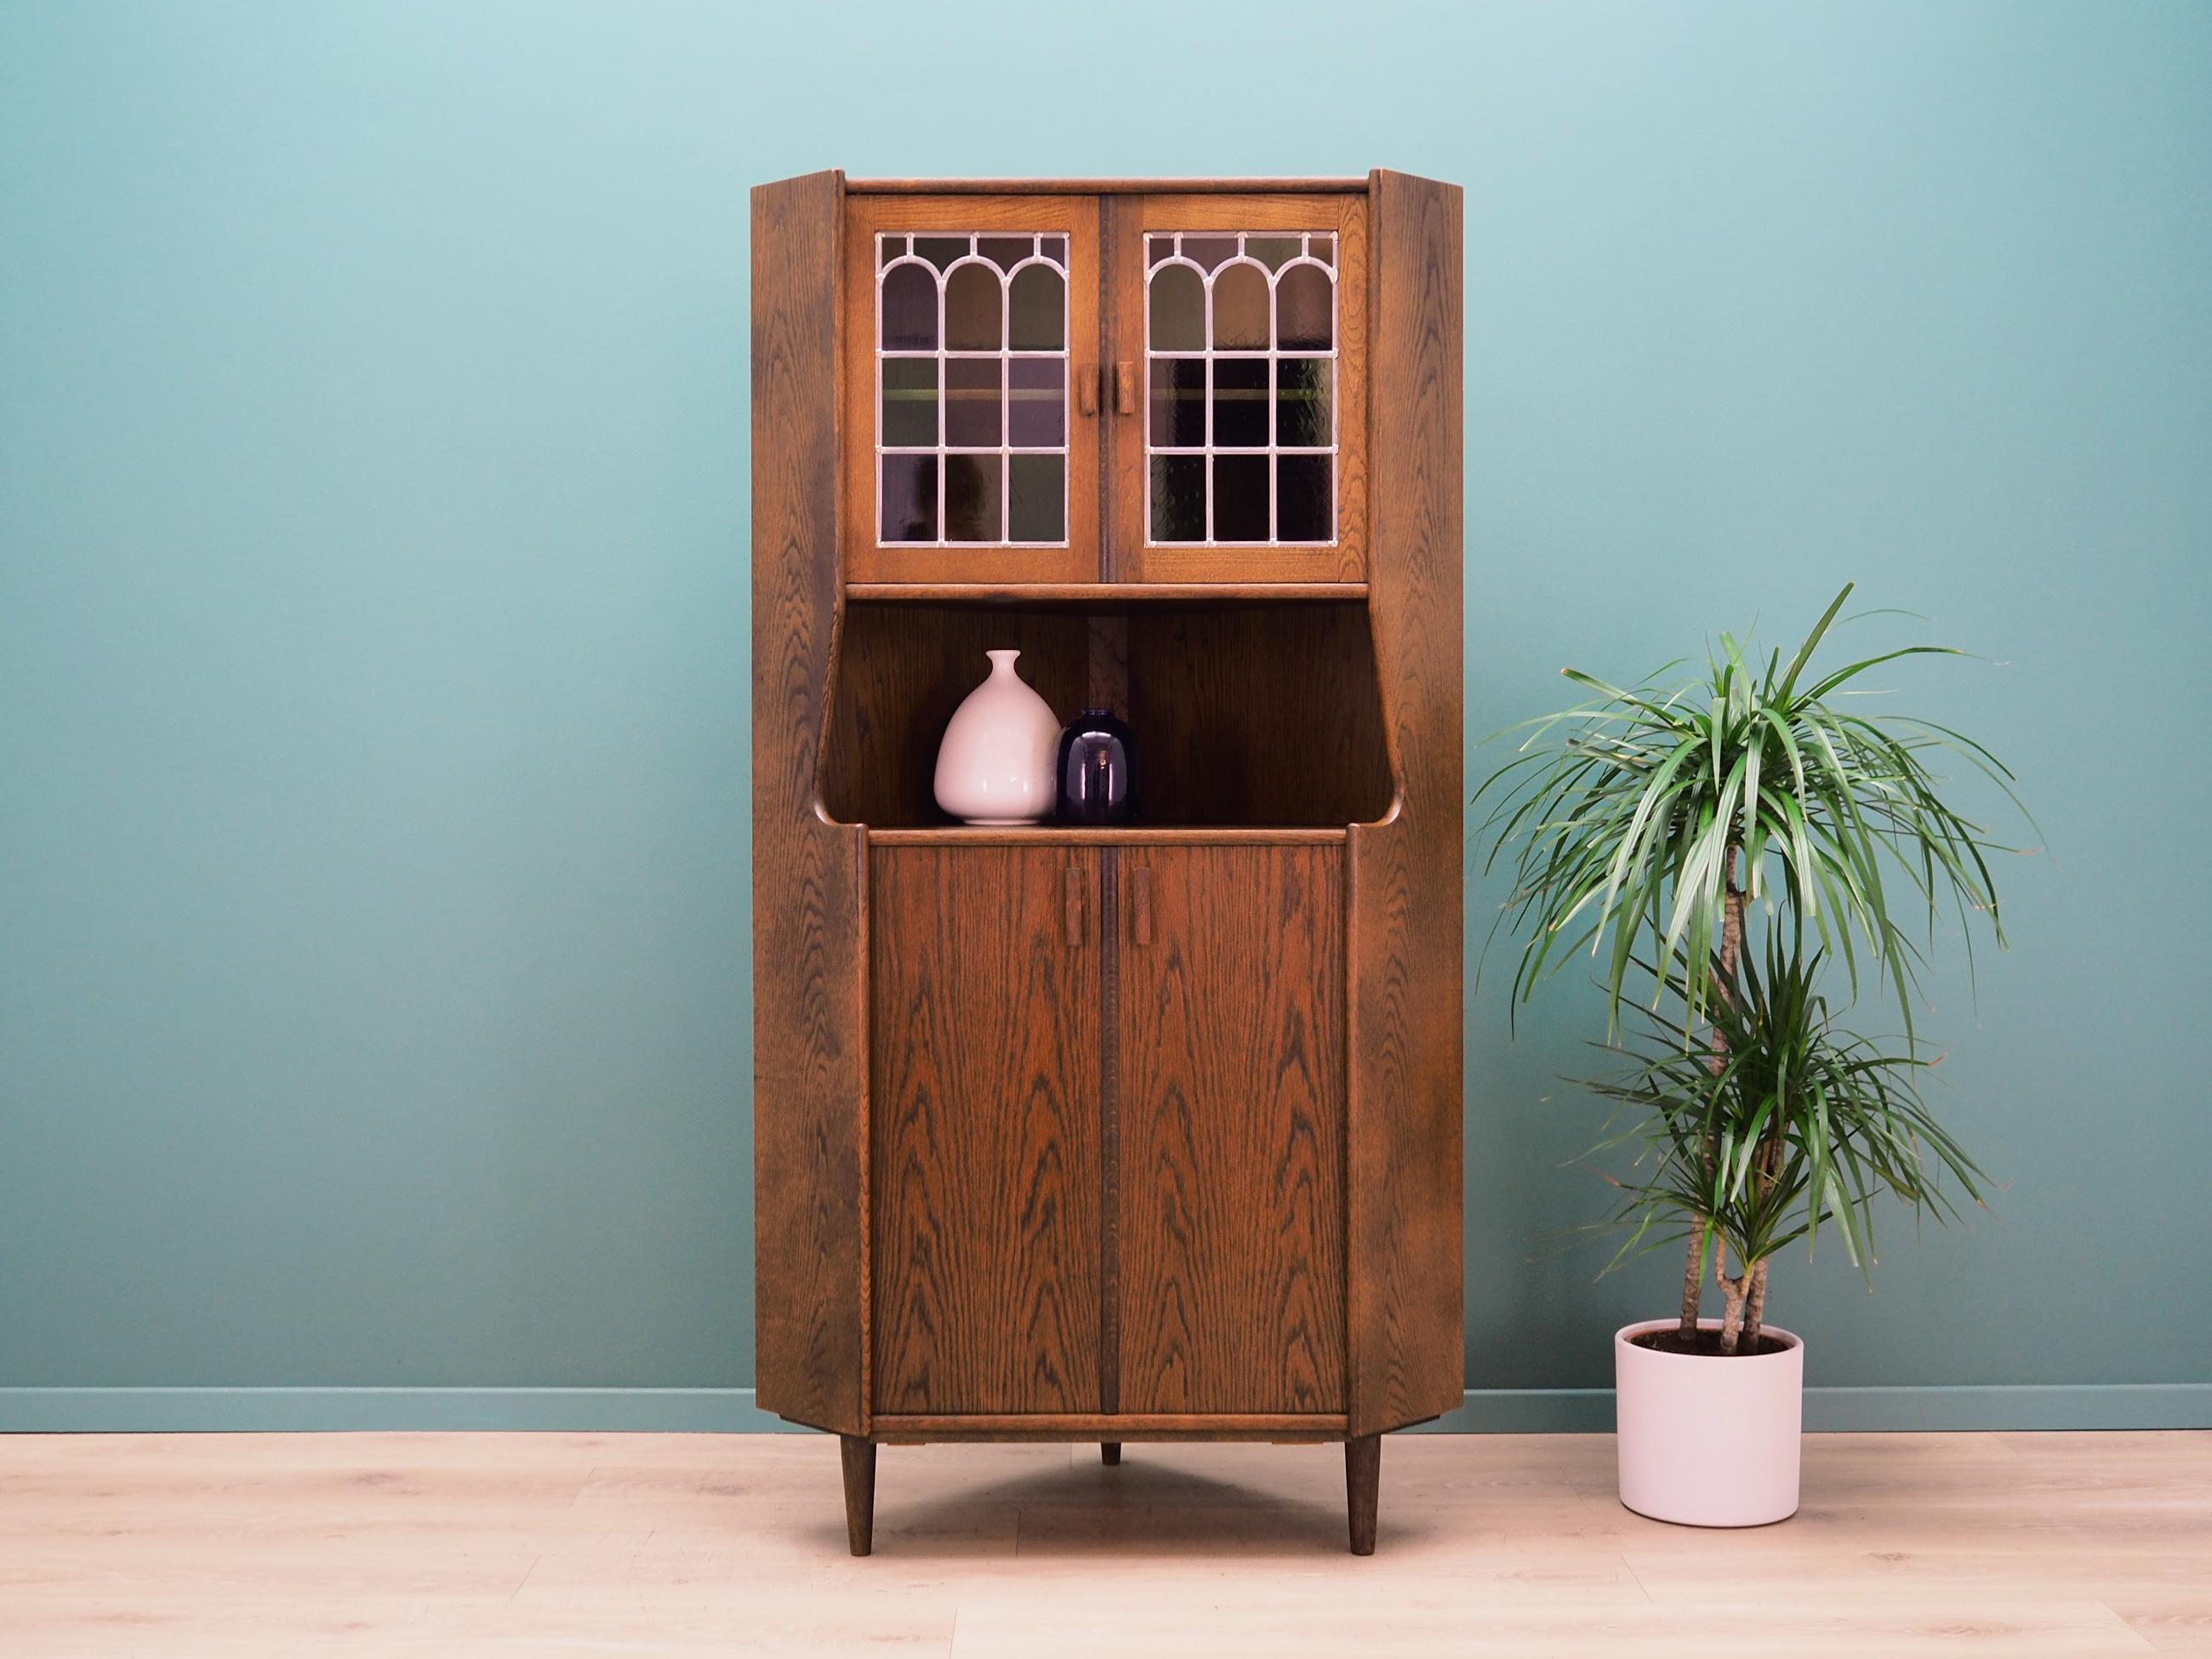 Cabinet was made in the 1960s, Danish production.

The construction is covered with oak veneer. The legs and handles are made of solid oak wood. The surface after refreshing. Inside the space has been filled with practical shelves with adjustable